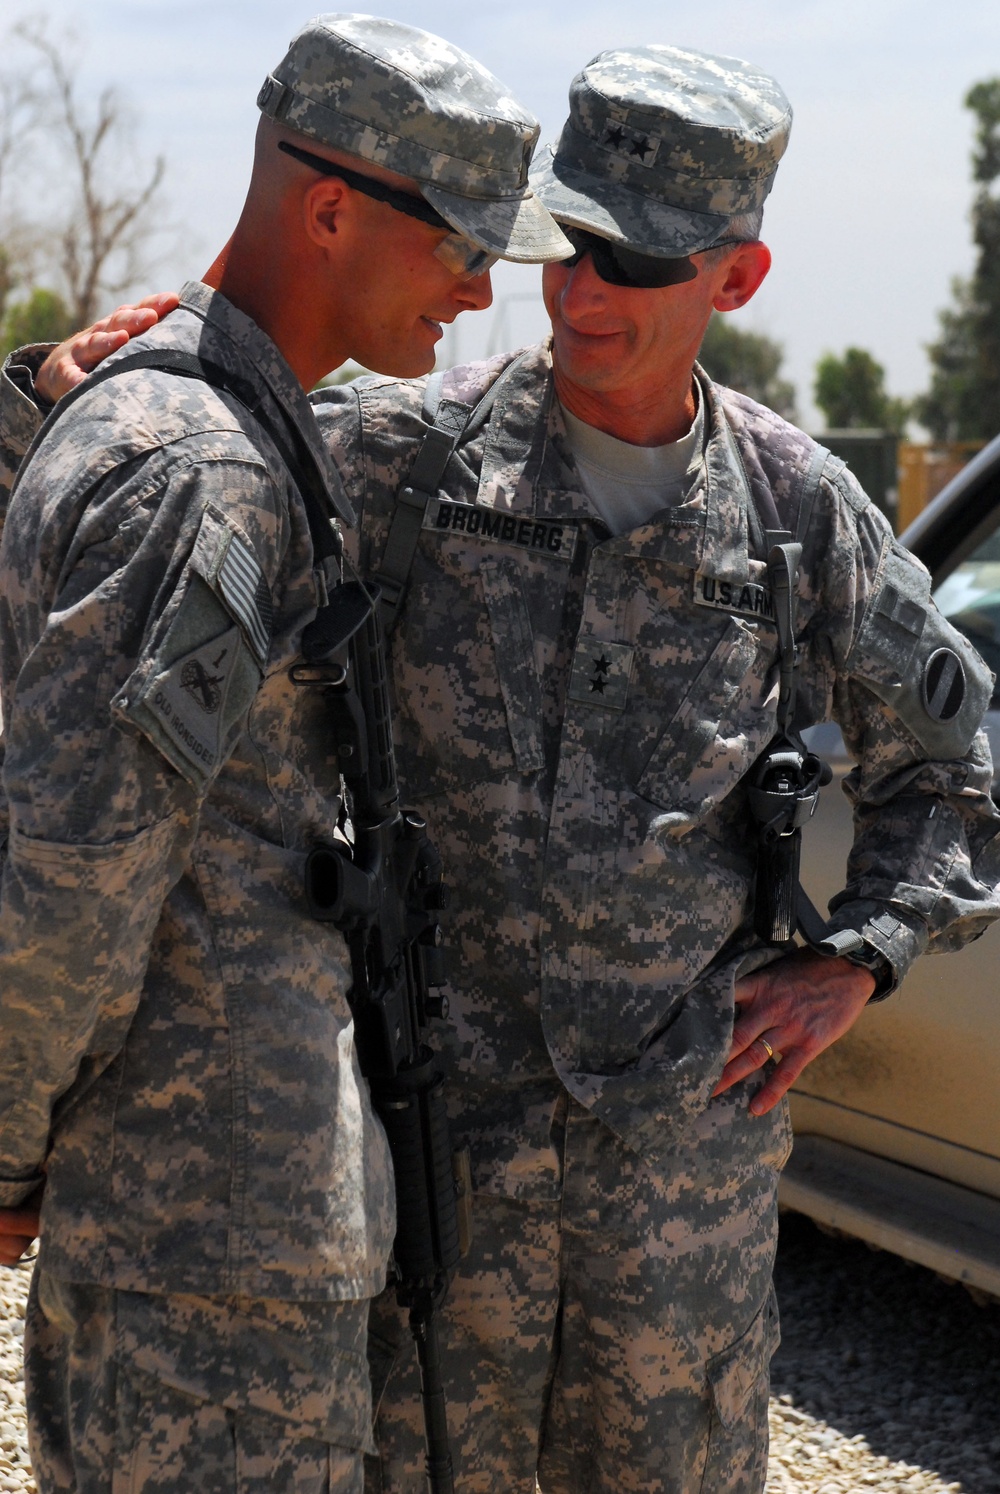 Fort Bliss Command Team Visits Soldiers in Iraq